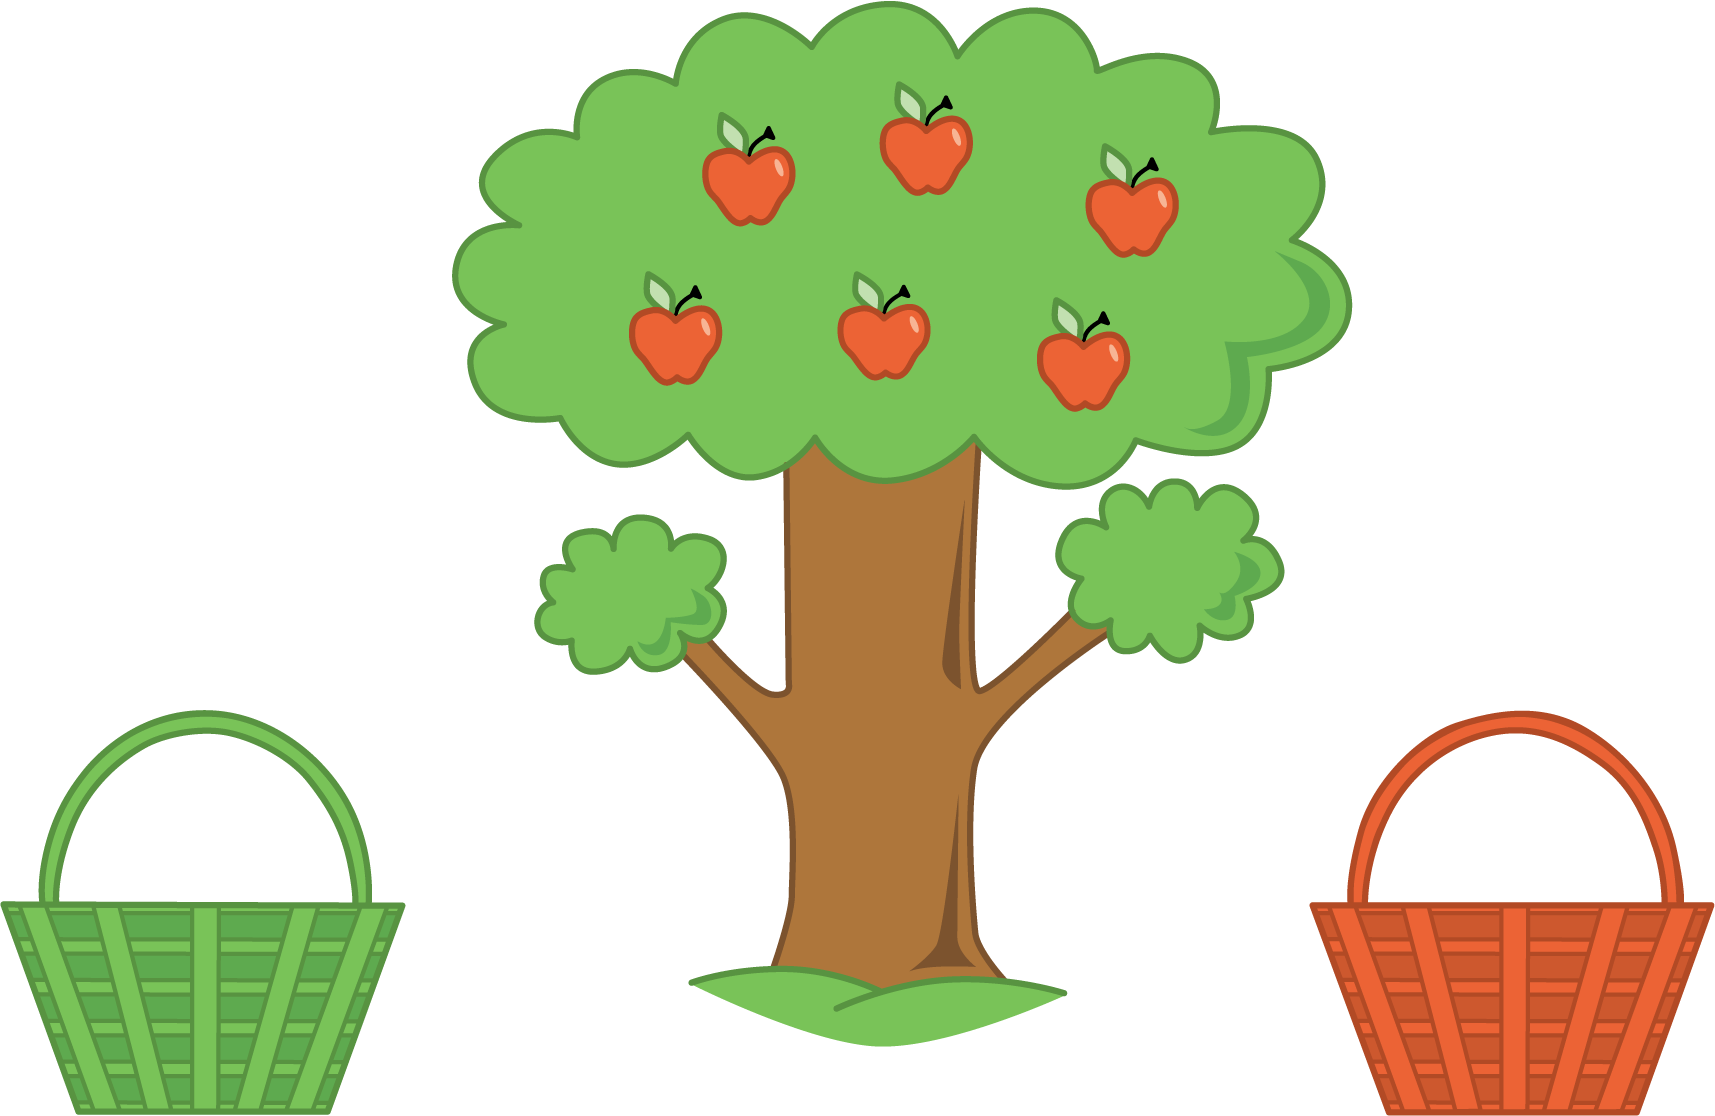 Apple tree with 6 red apples. 2 baskets, 1 green and 1 red.